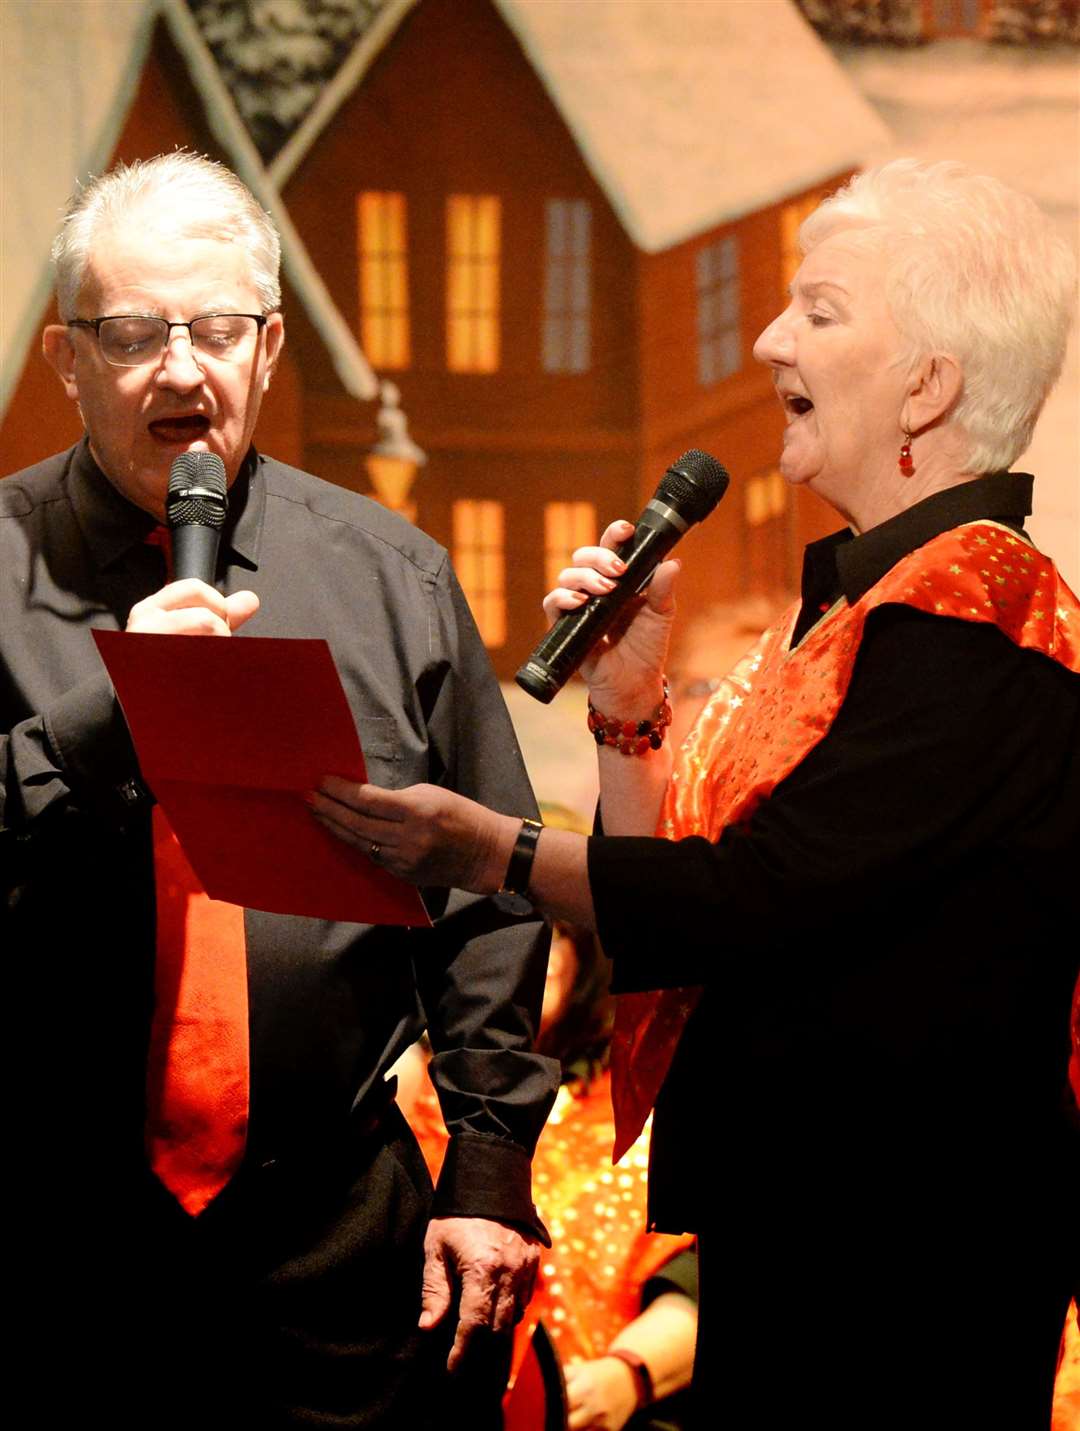 Richard and Liz Syret sing Have Yourself a Merry Little Christmas.